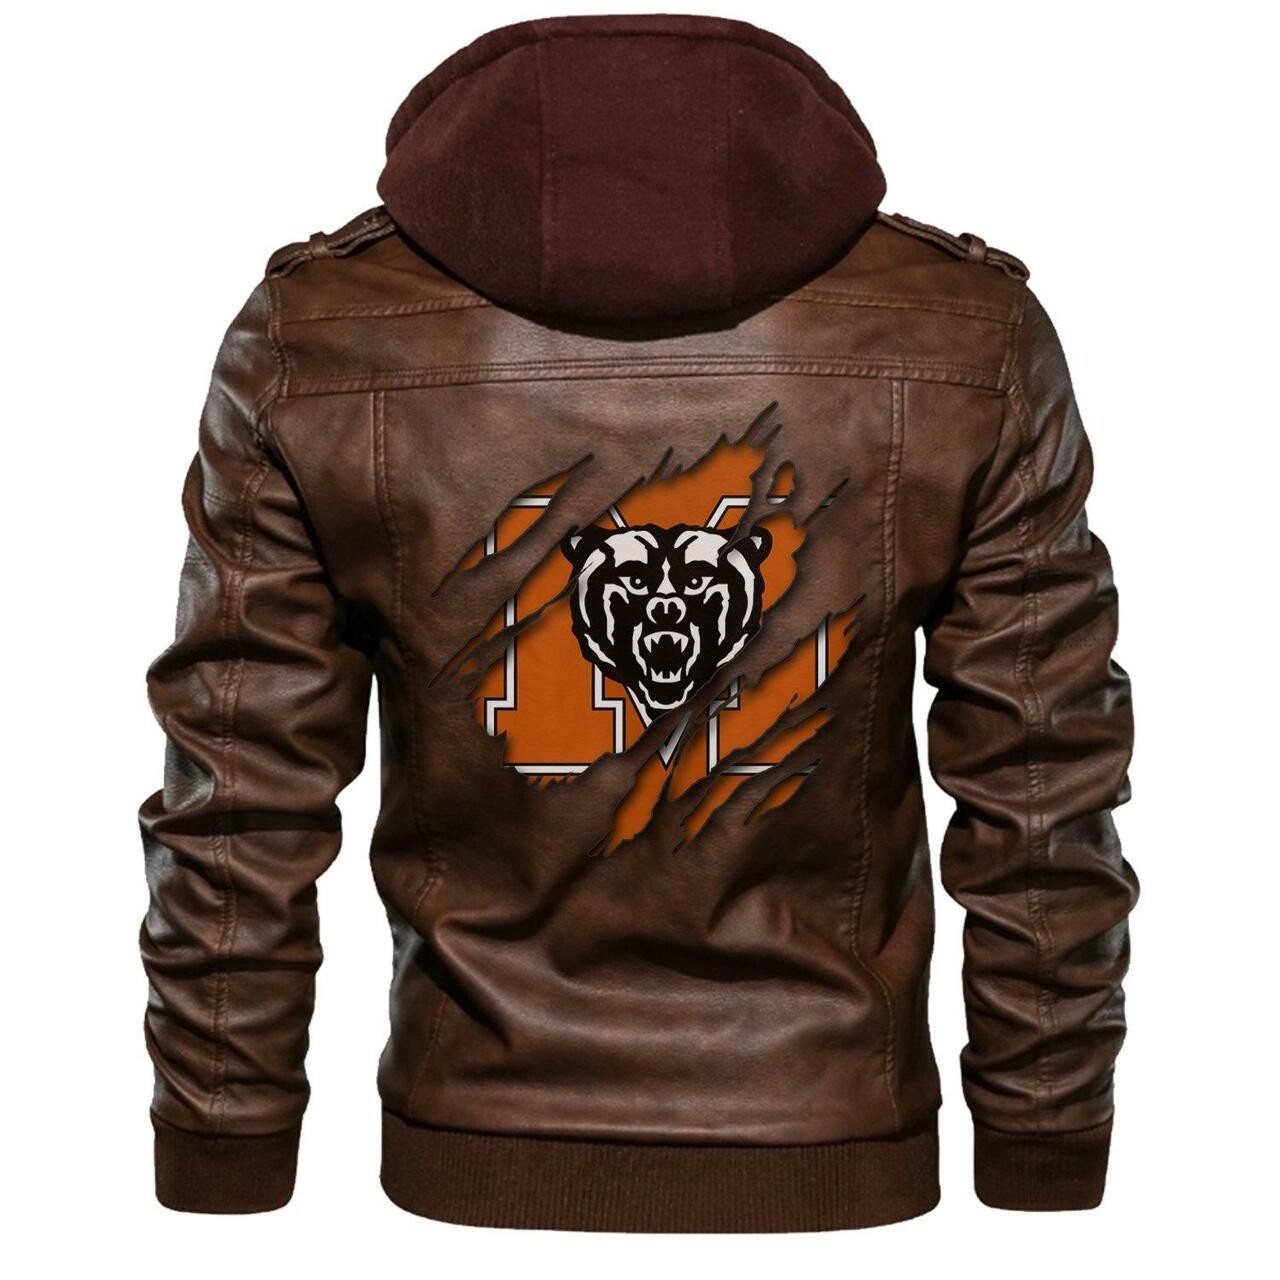 Check out and find the right leather jacket below 65